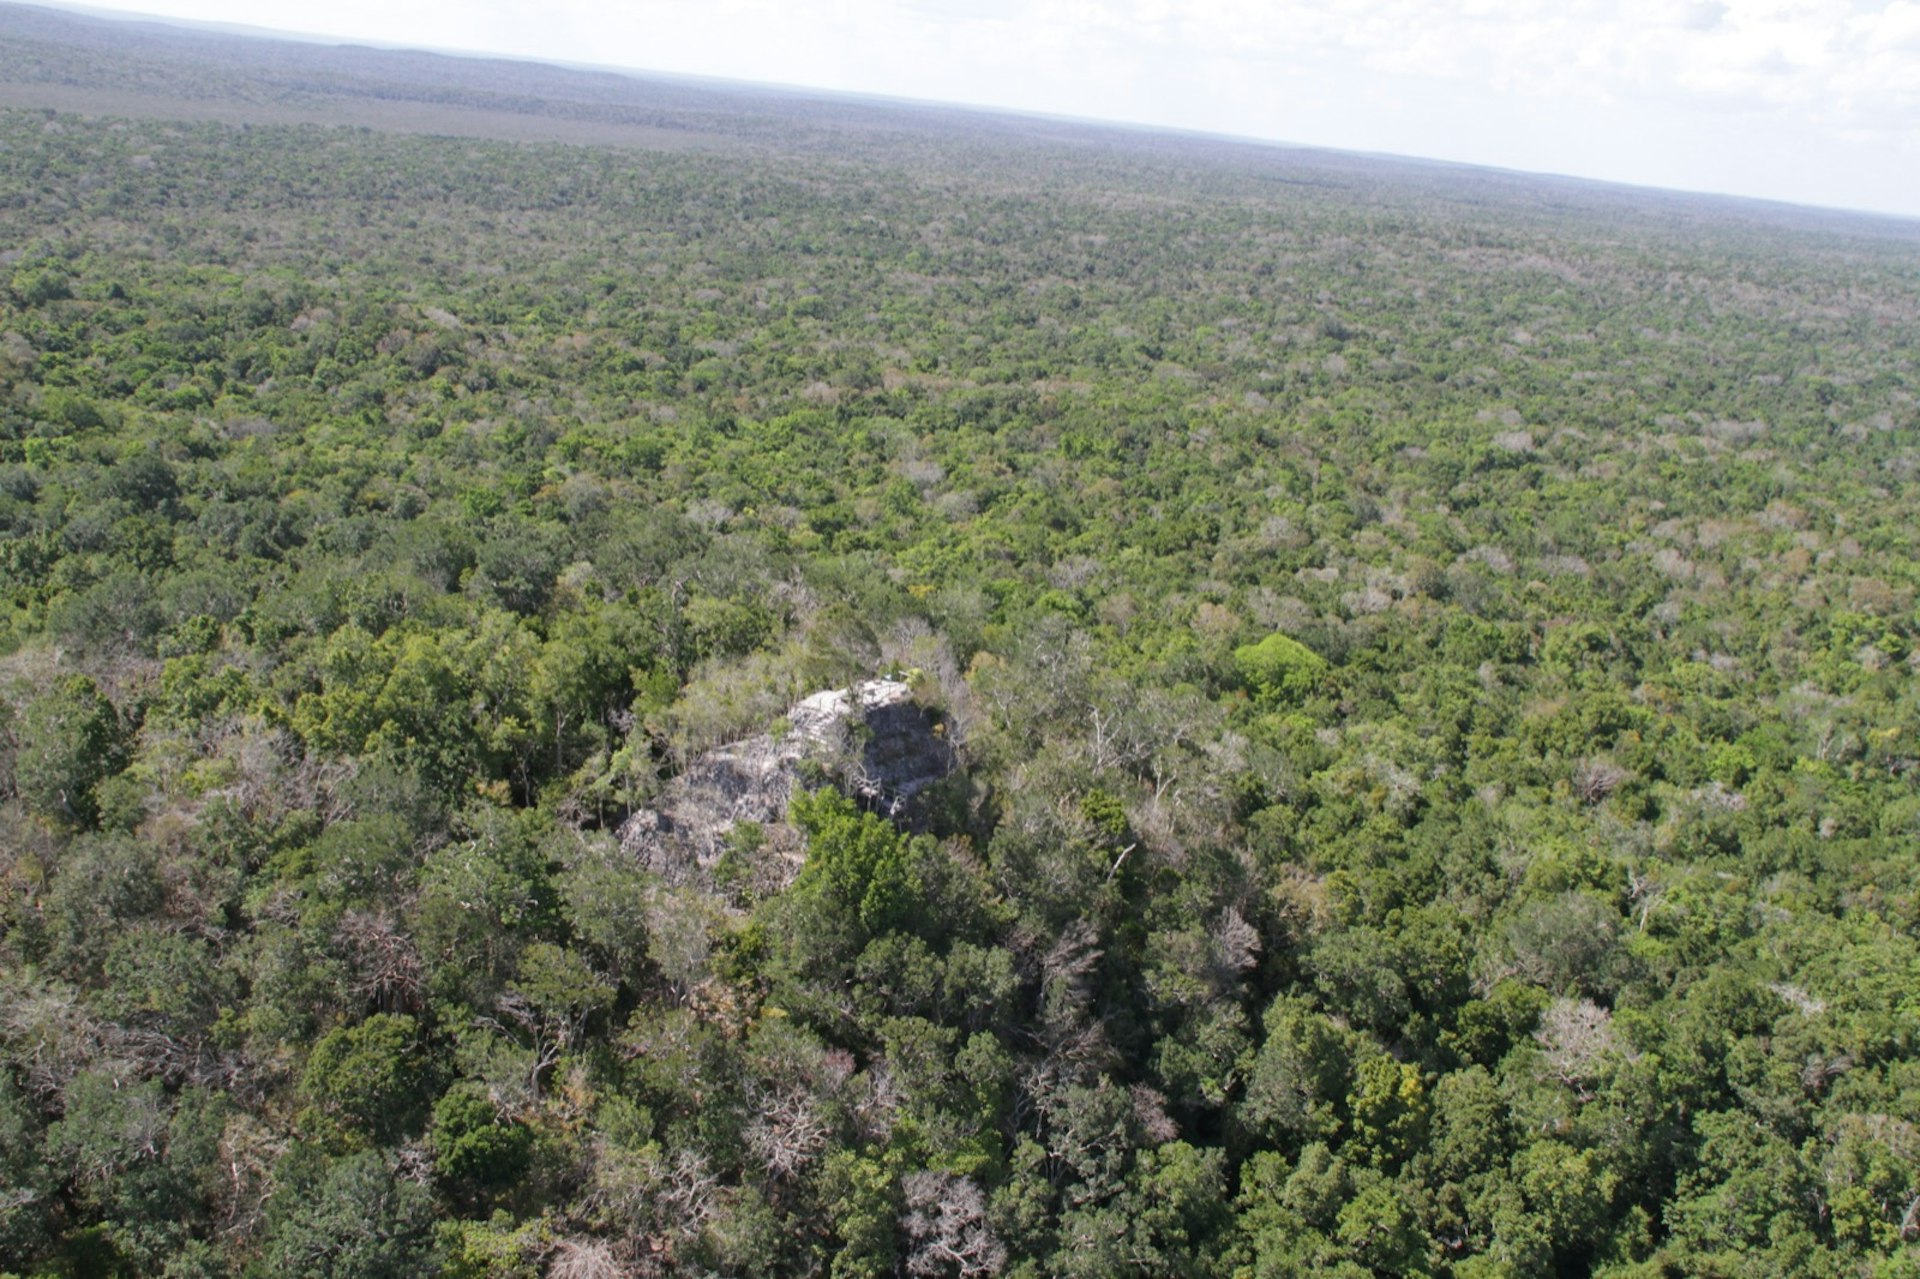 The tip of La Danta, a Mayan pyramid located in Guatemala, sticks out above the tree line in the El Peten Jungle © Ray Bartlett / Lonely Planet 